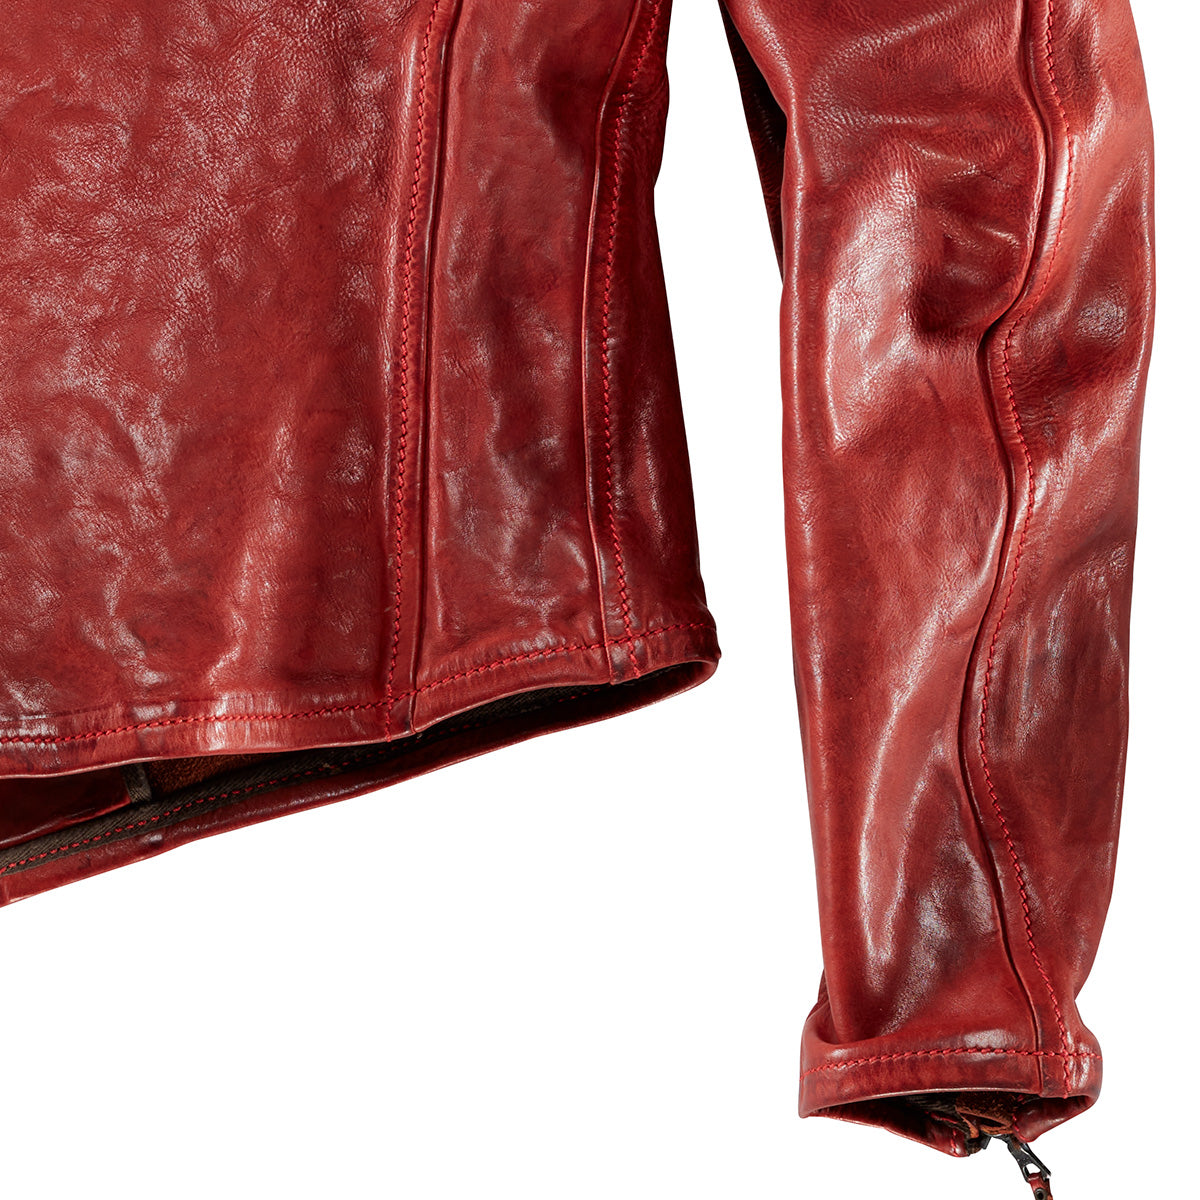 Thedi leather jacket Cafe Racer Red